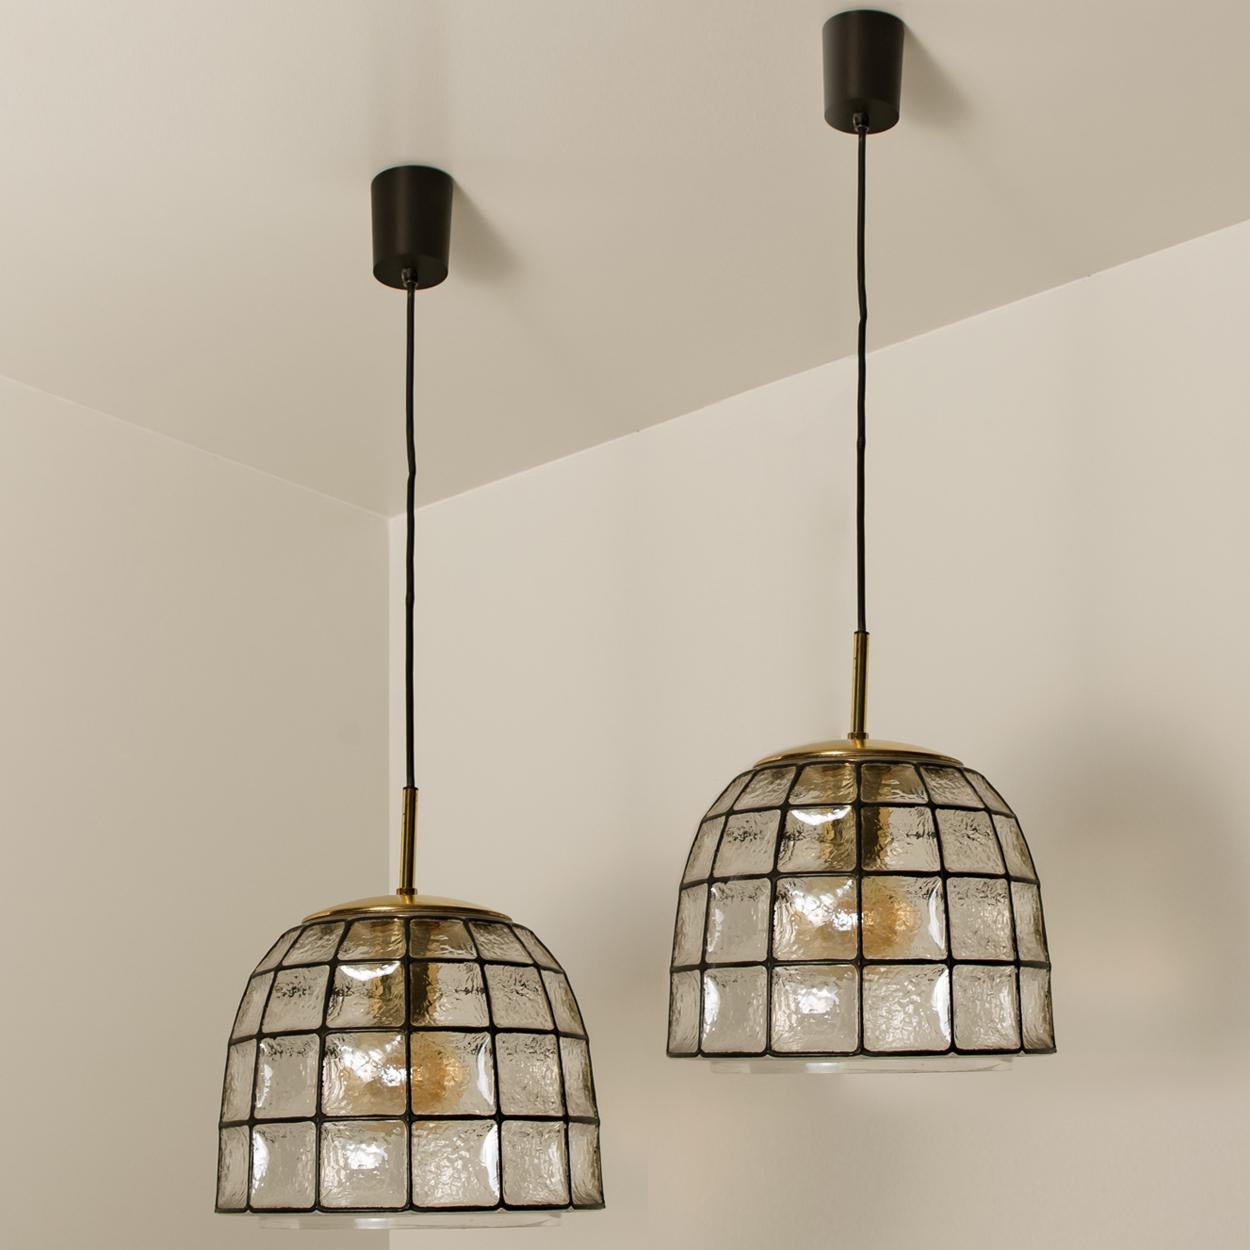 Minimal, geometric and simply shaped design. This beautiful and unique pair of hand blown glass chandeliers or pedant lights were manufactured by Glashütte Limburg in Germany during the 1960s, (late 1960s or early 1970s). Beautiful craftsmanship.